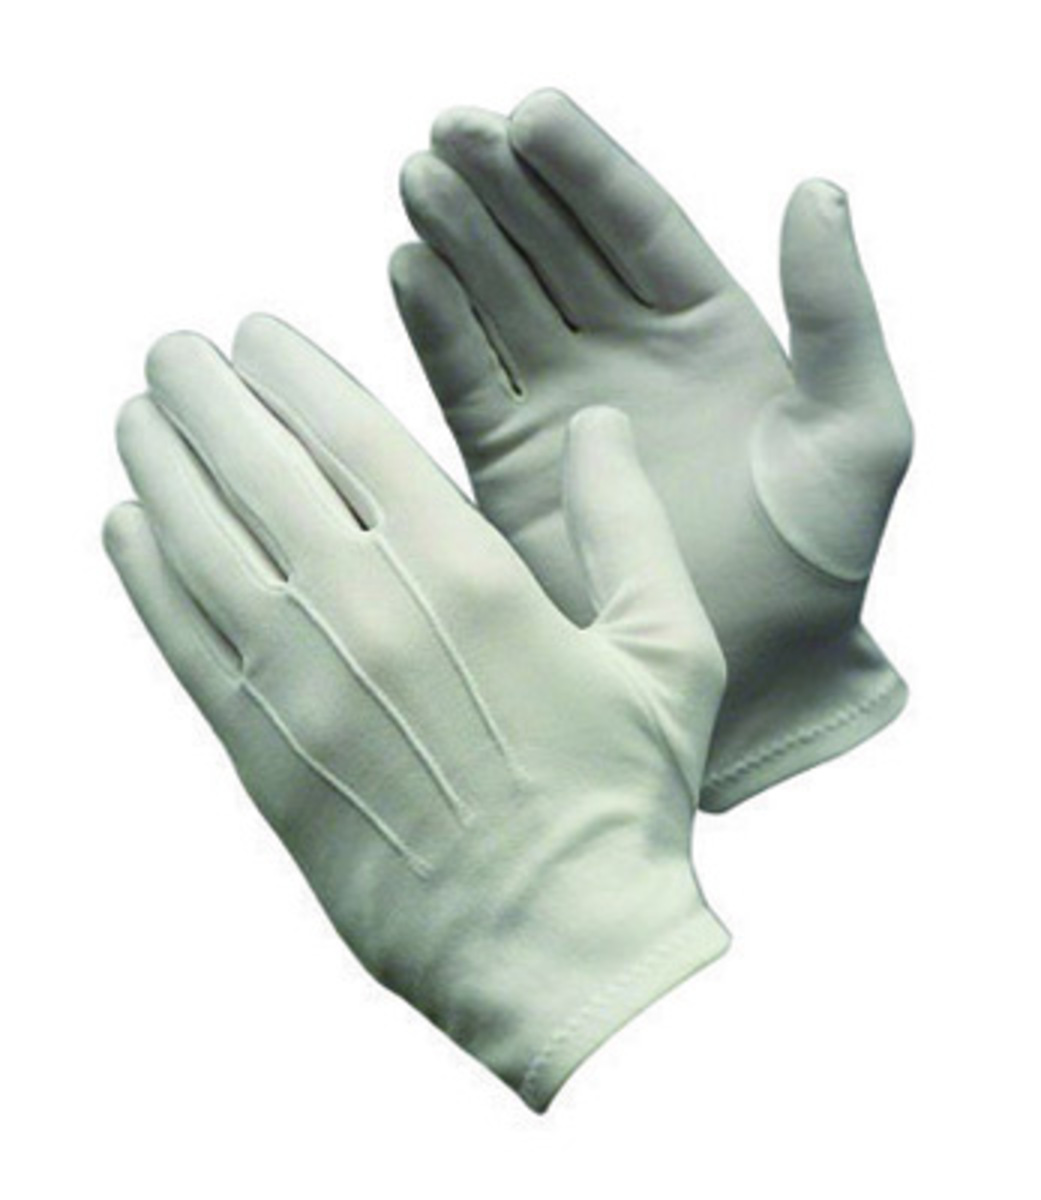 size 8 Medium White polyester nylon gloves with OPEN cuffs for fine handling 